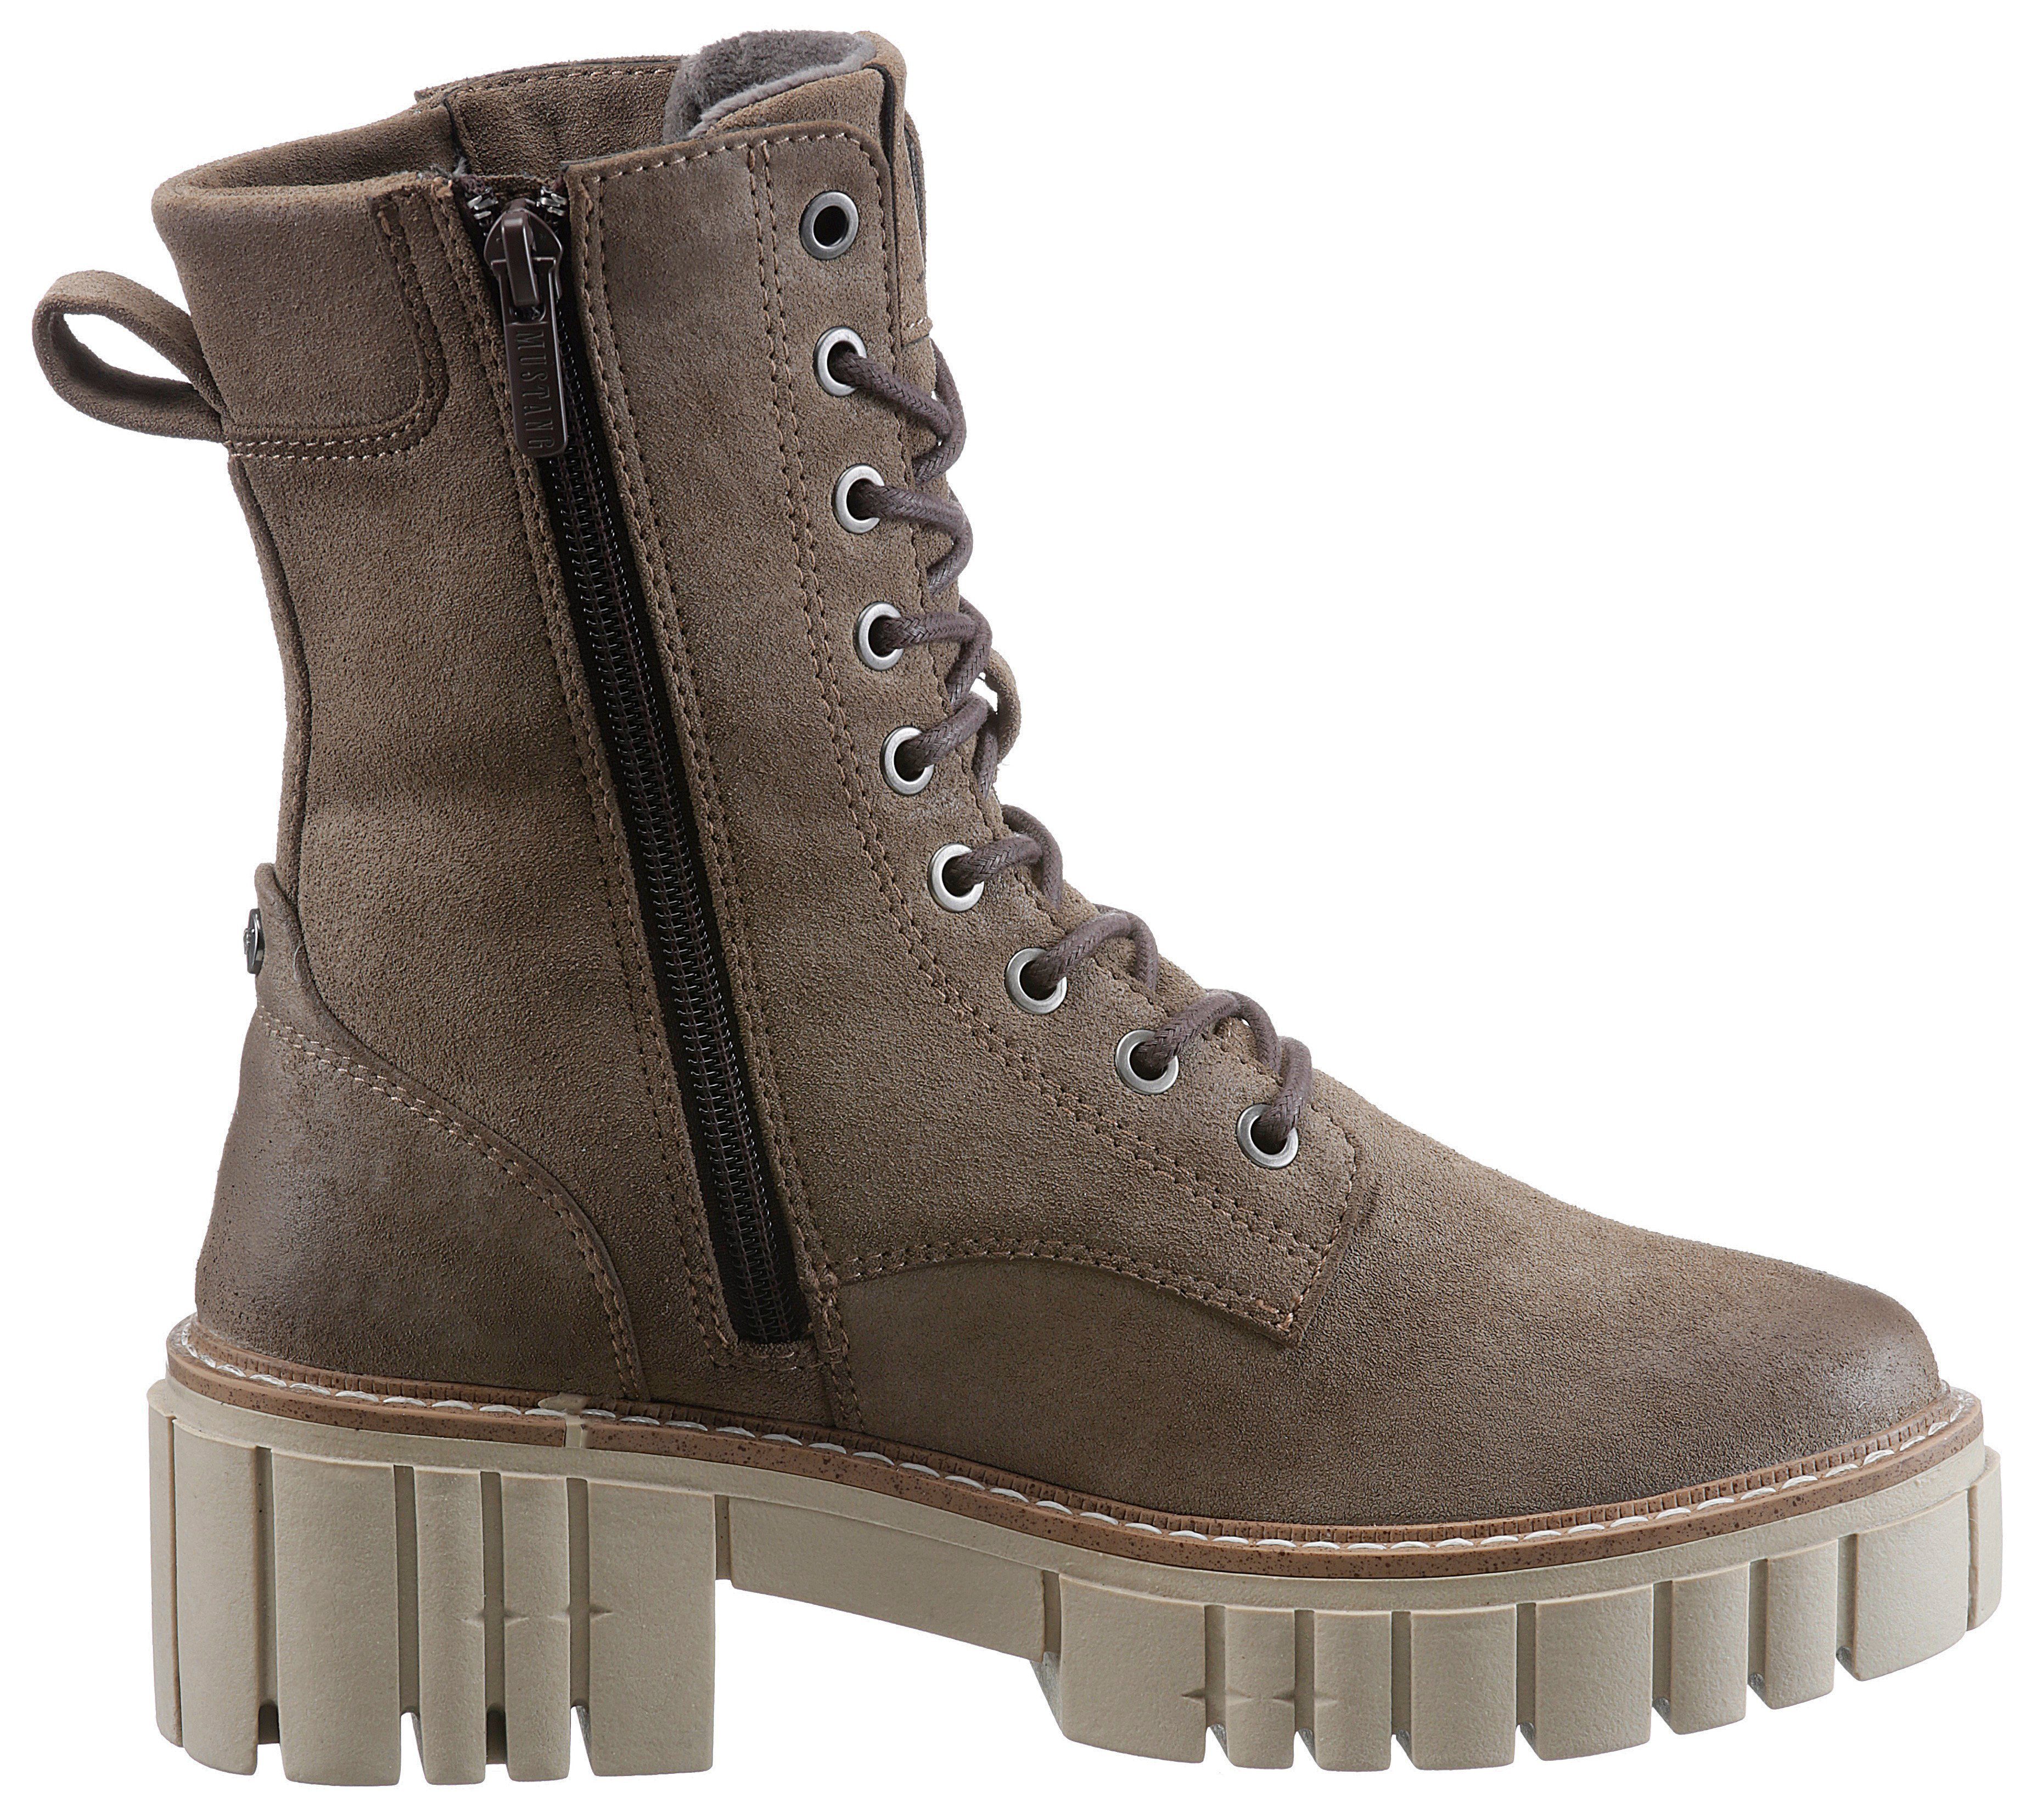 taupe Profilsohle Schnürboots mit Shoes Mustang